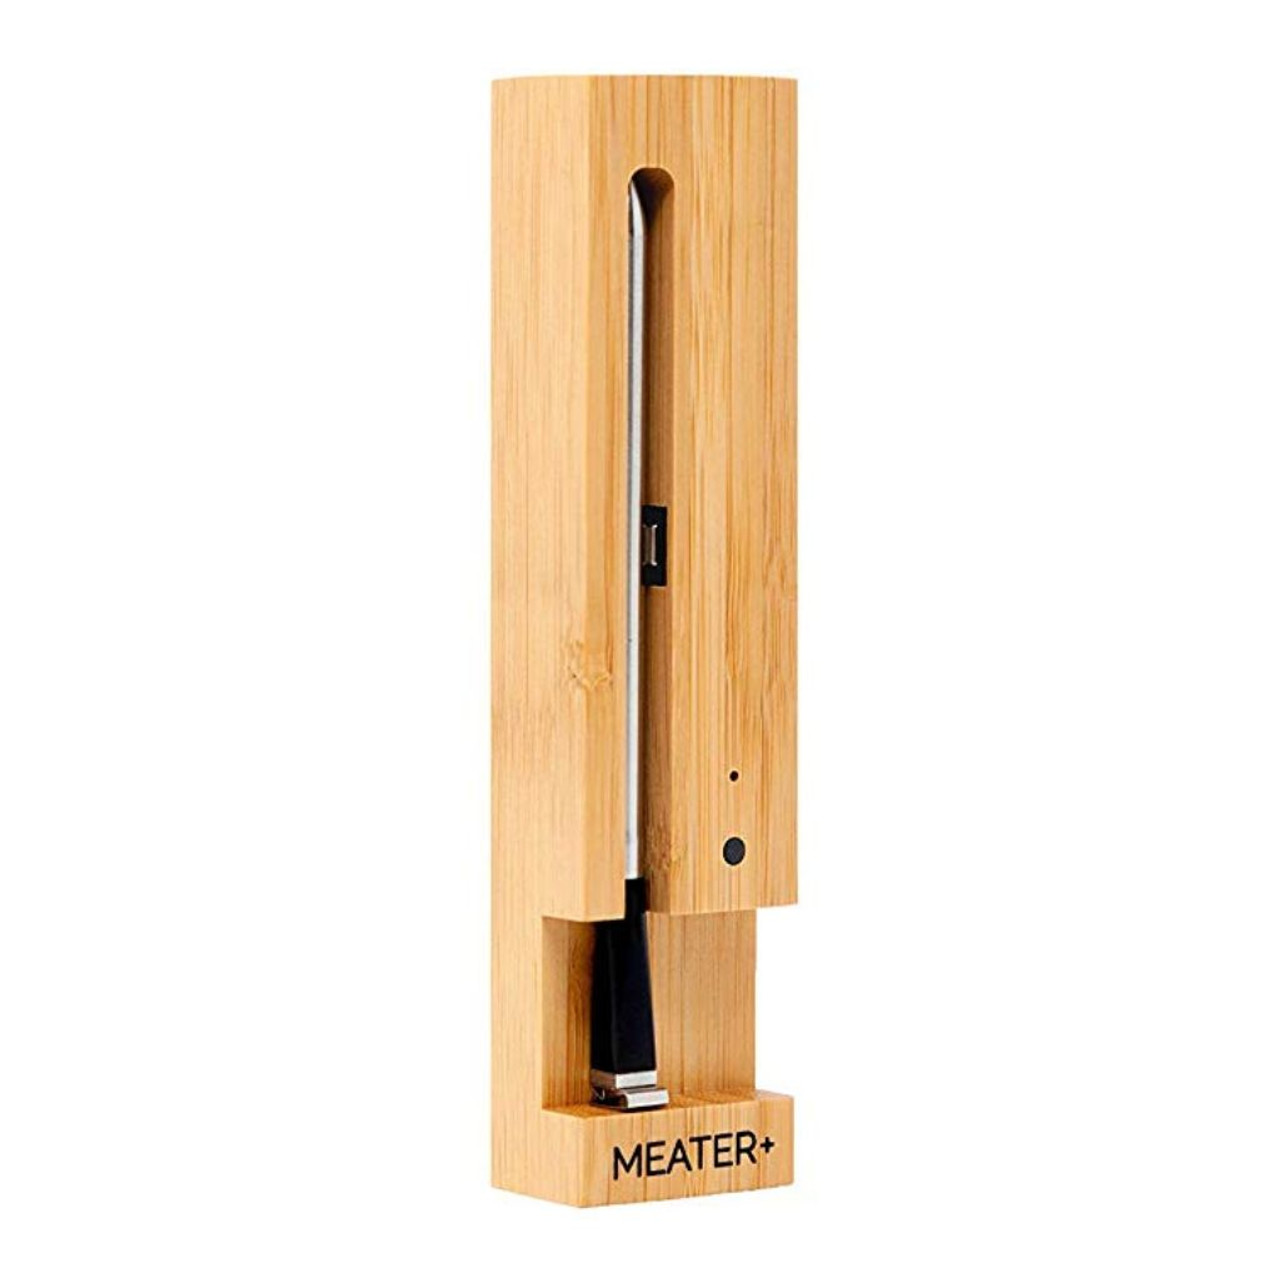 MEATER® Plus Wireless Smart Meat Thermometer, 165-Foot Range, OSC-MT-MP01 product image